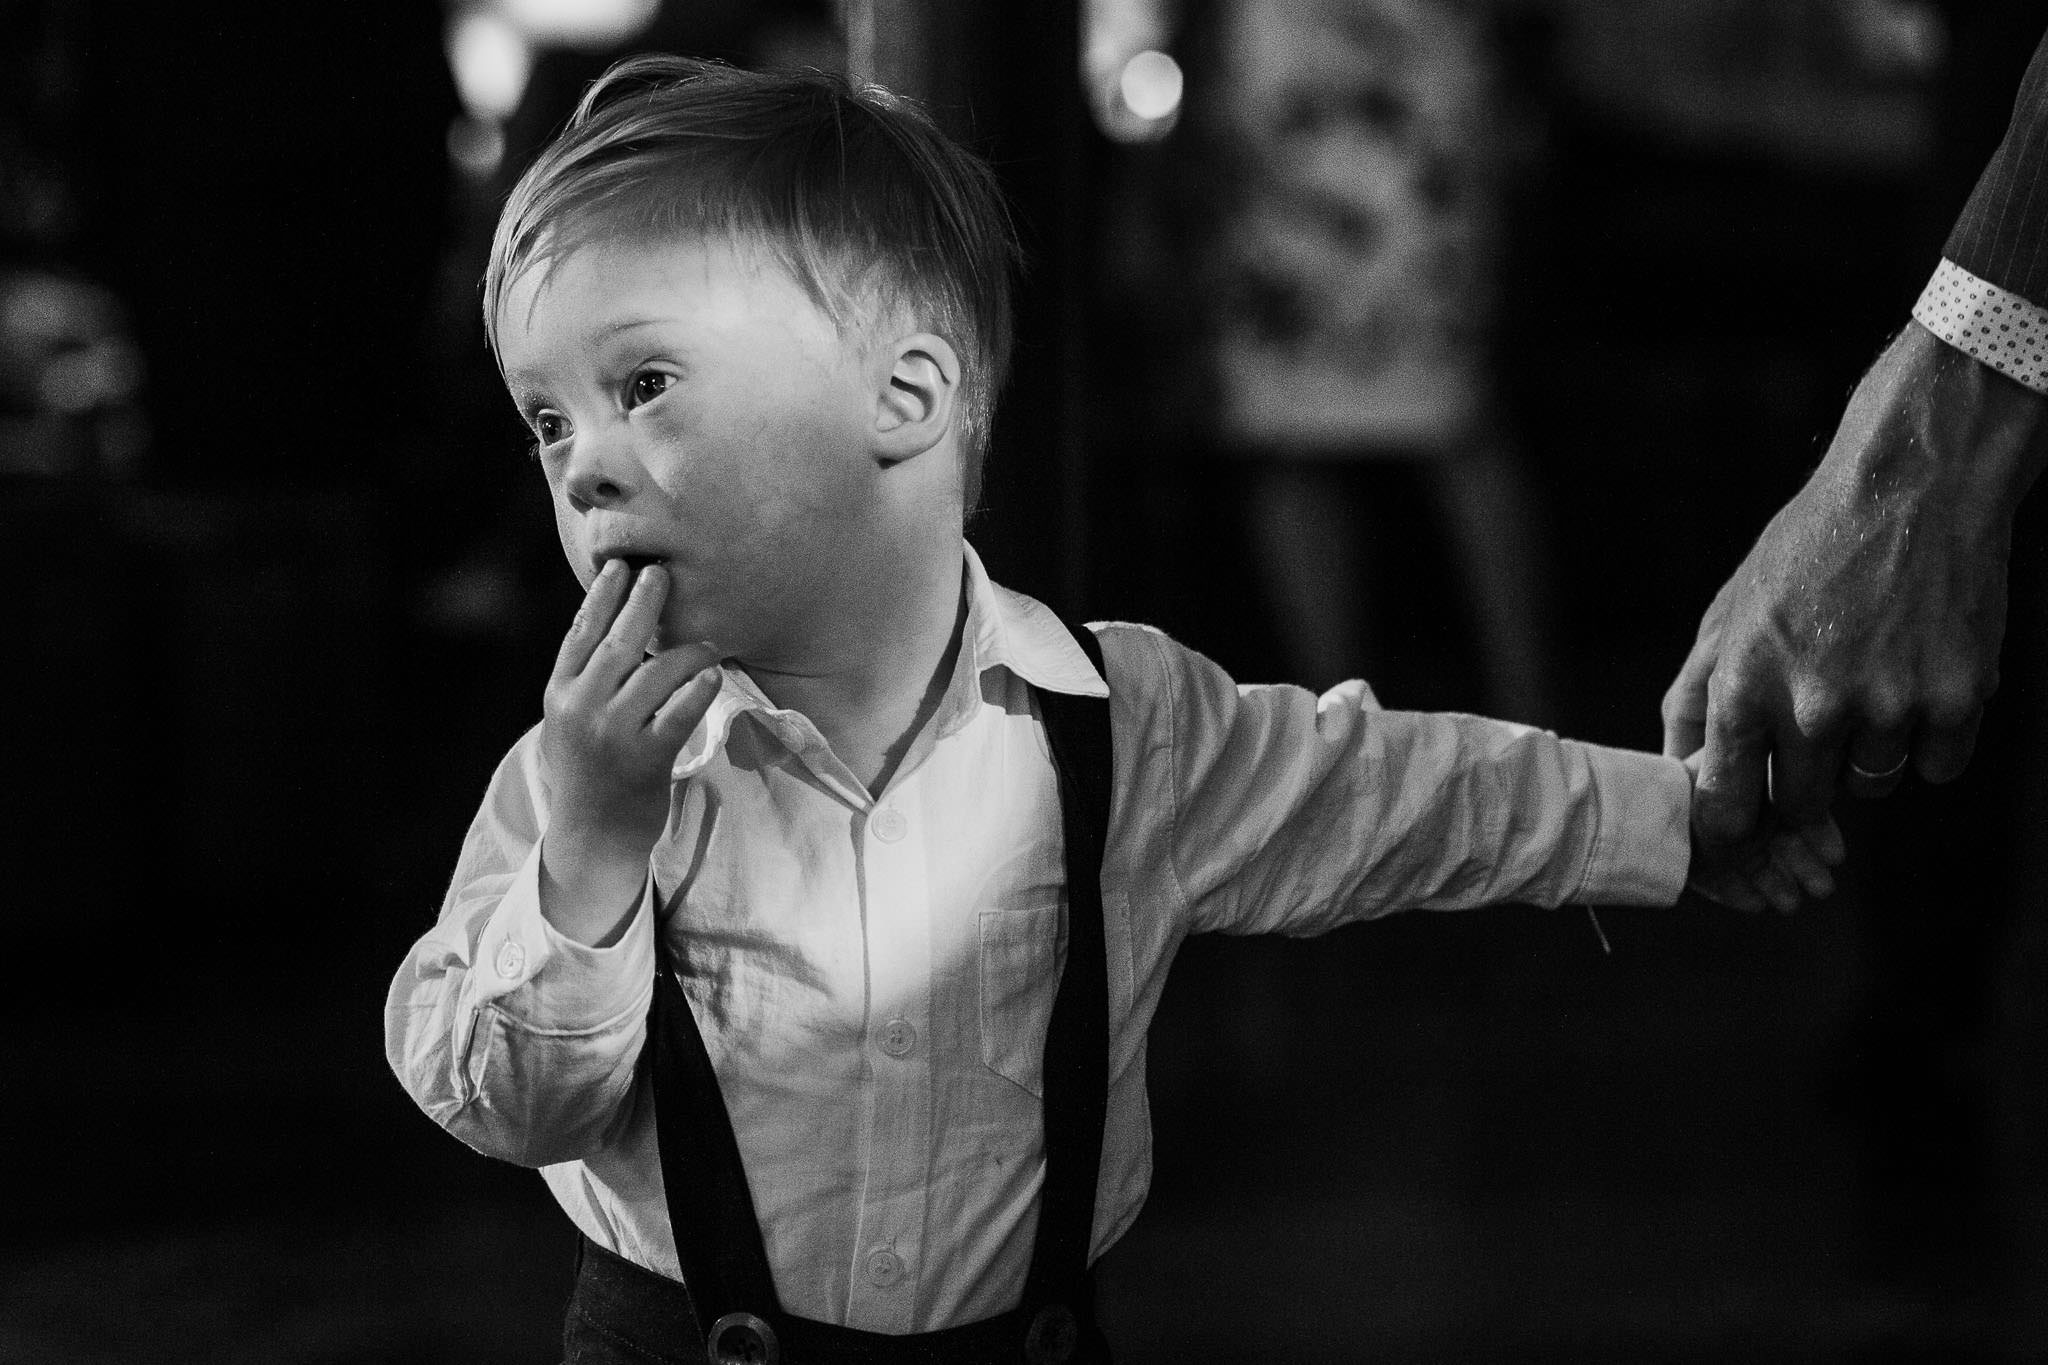 wedding photojournalism candid capture of little page boy